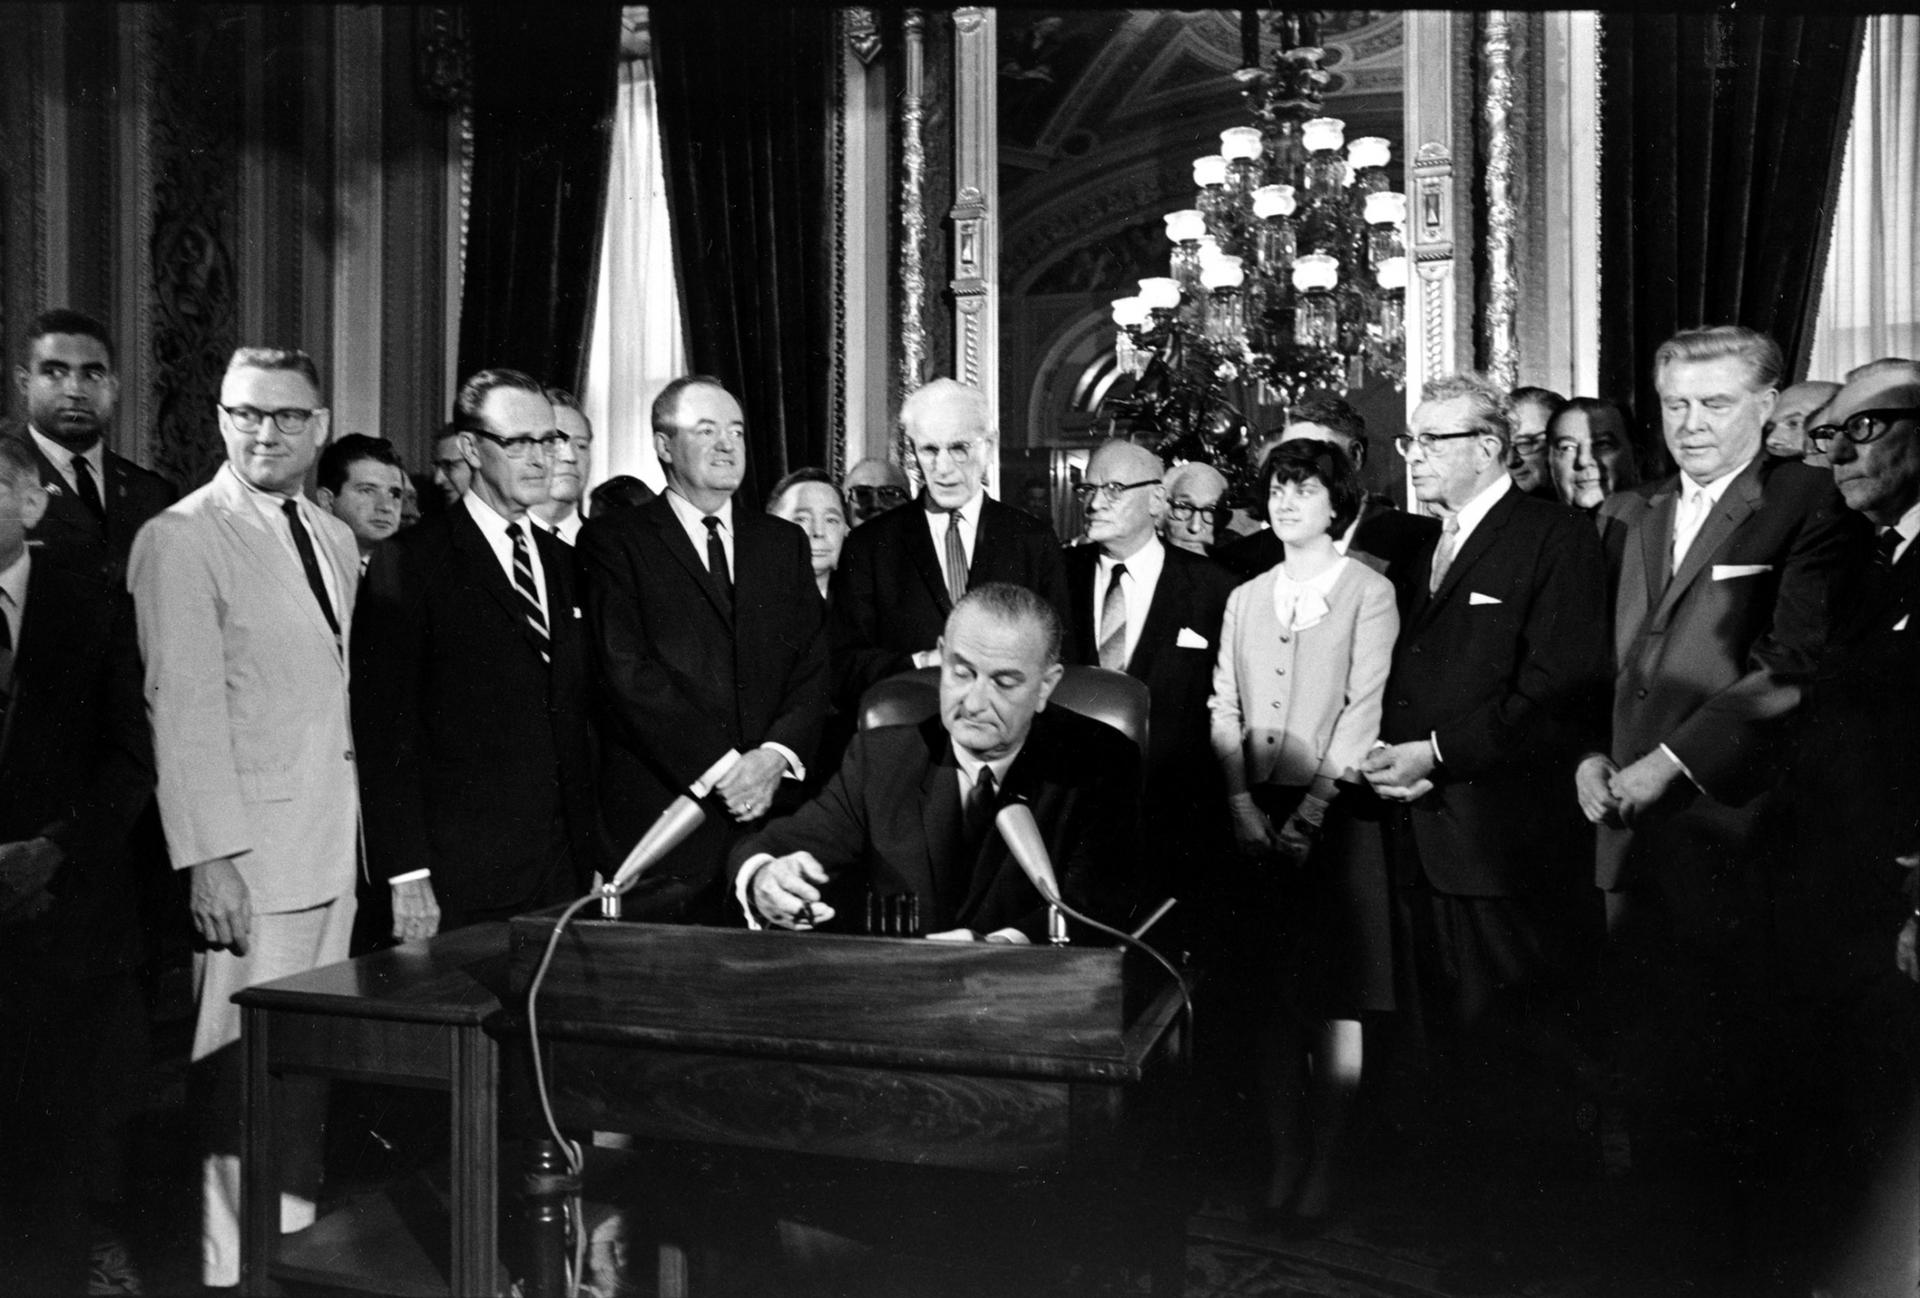 President Lyndon Baines Johnson signs the Voting Rights Act of 1965 in a ceremony in the President's Room near the Senate Chambers in Washington, DC, Aug. 6, 1965.